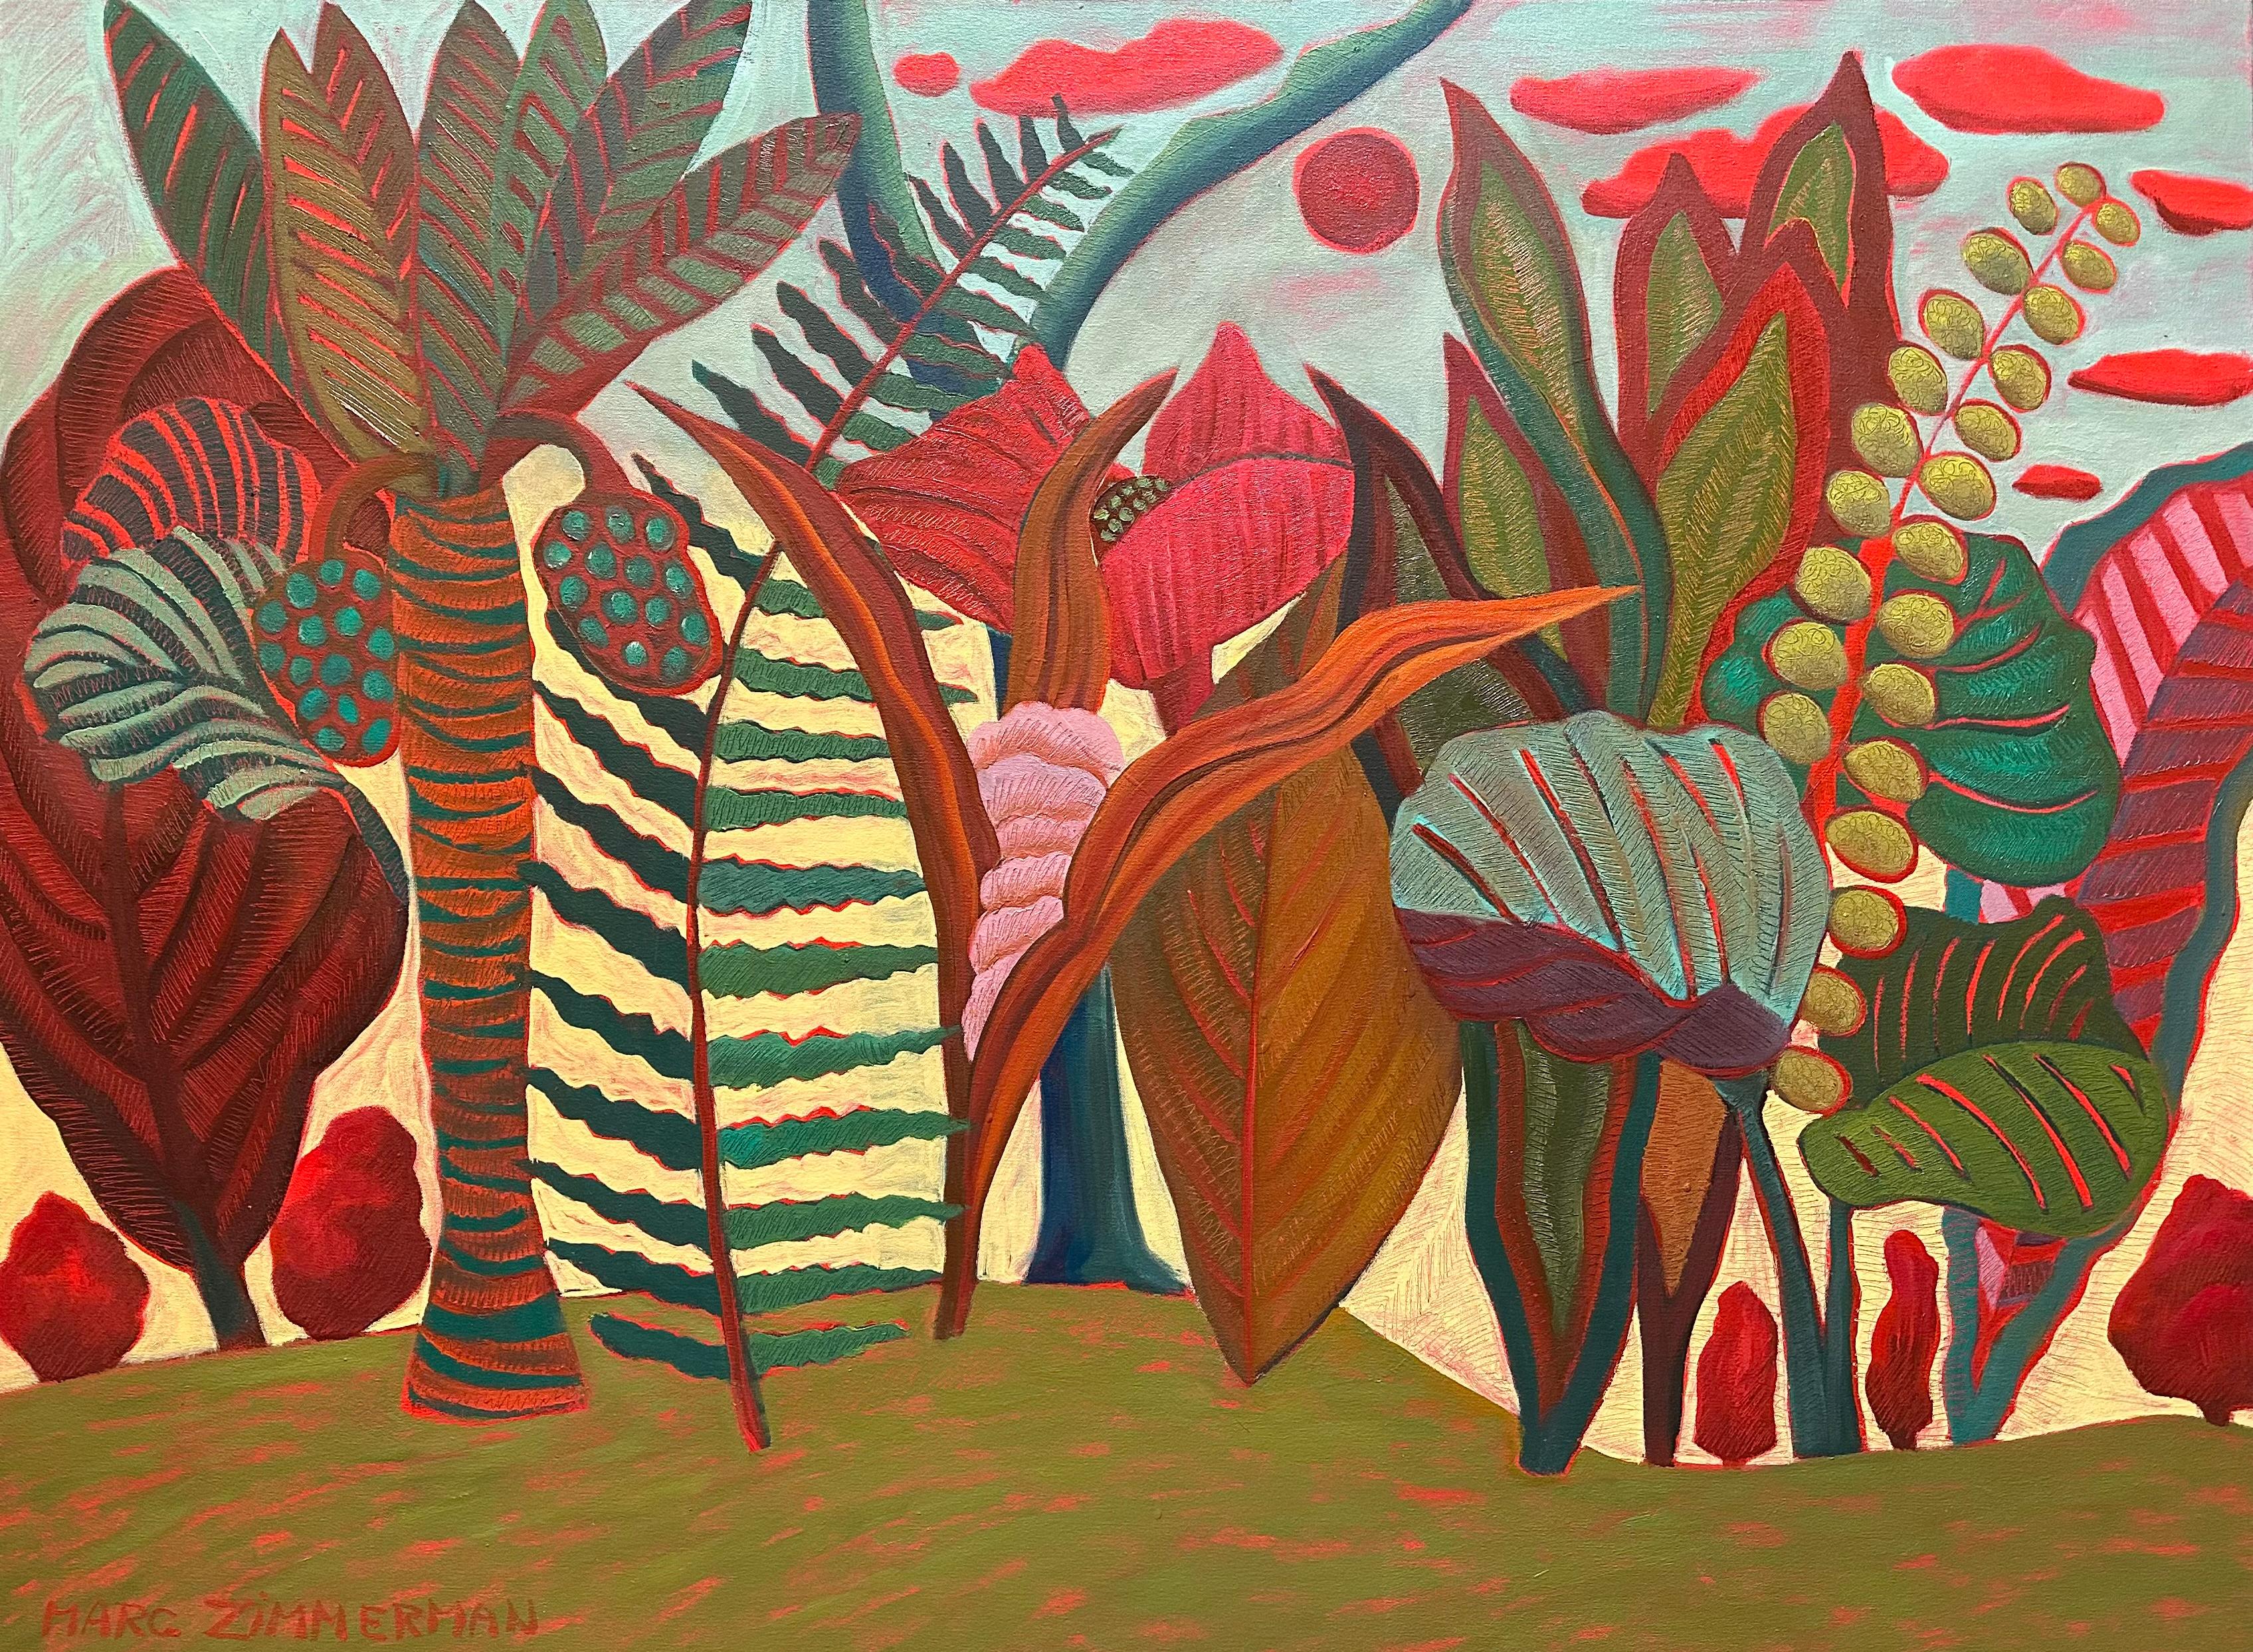 Colorful Jungle By Marc Zimmerman


Marc Zimmerman creates playful paintings, whether deep mysterious jungle or delightfully whimsical florals. His color palette explores various harmonies yet always surprises with new color excitement. Years of